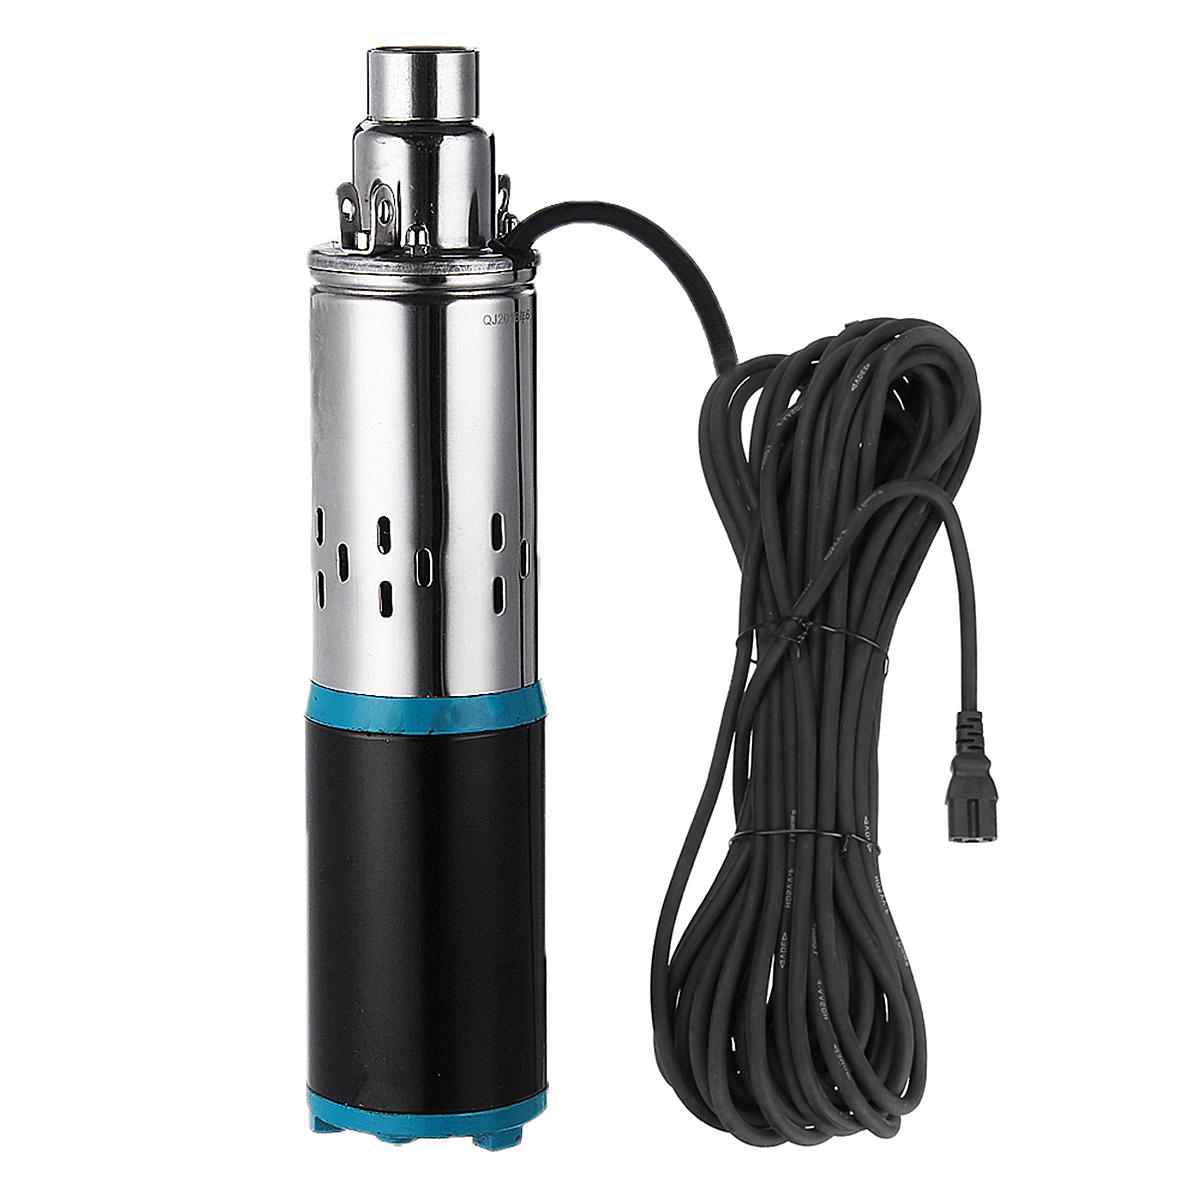 Water Pump 48V 220W 55m Deep Well Solar Water Pump DC Screw Submersible Pump for Irrigation Garden Home Agricultural